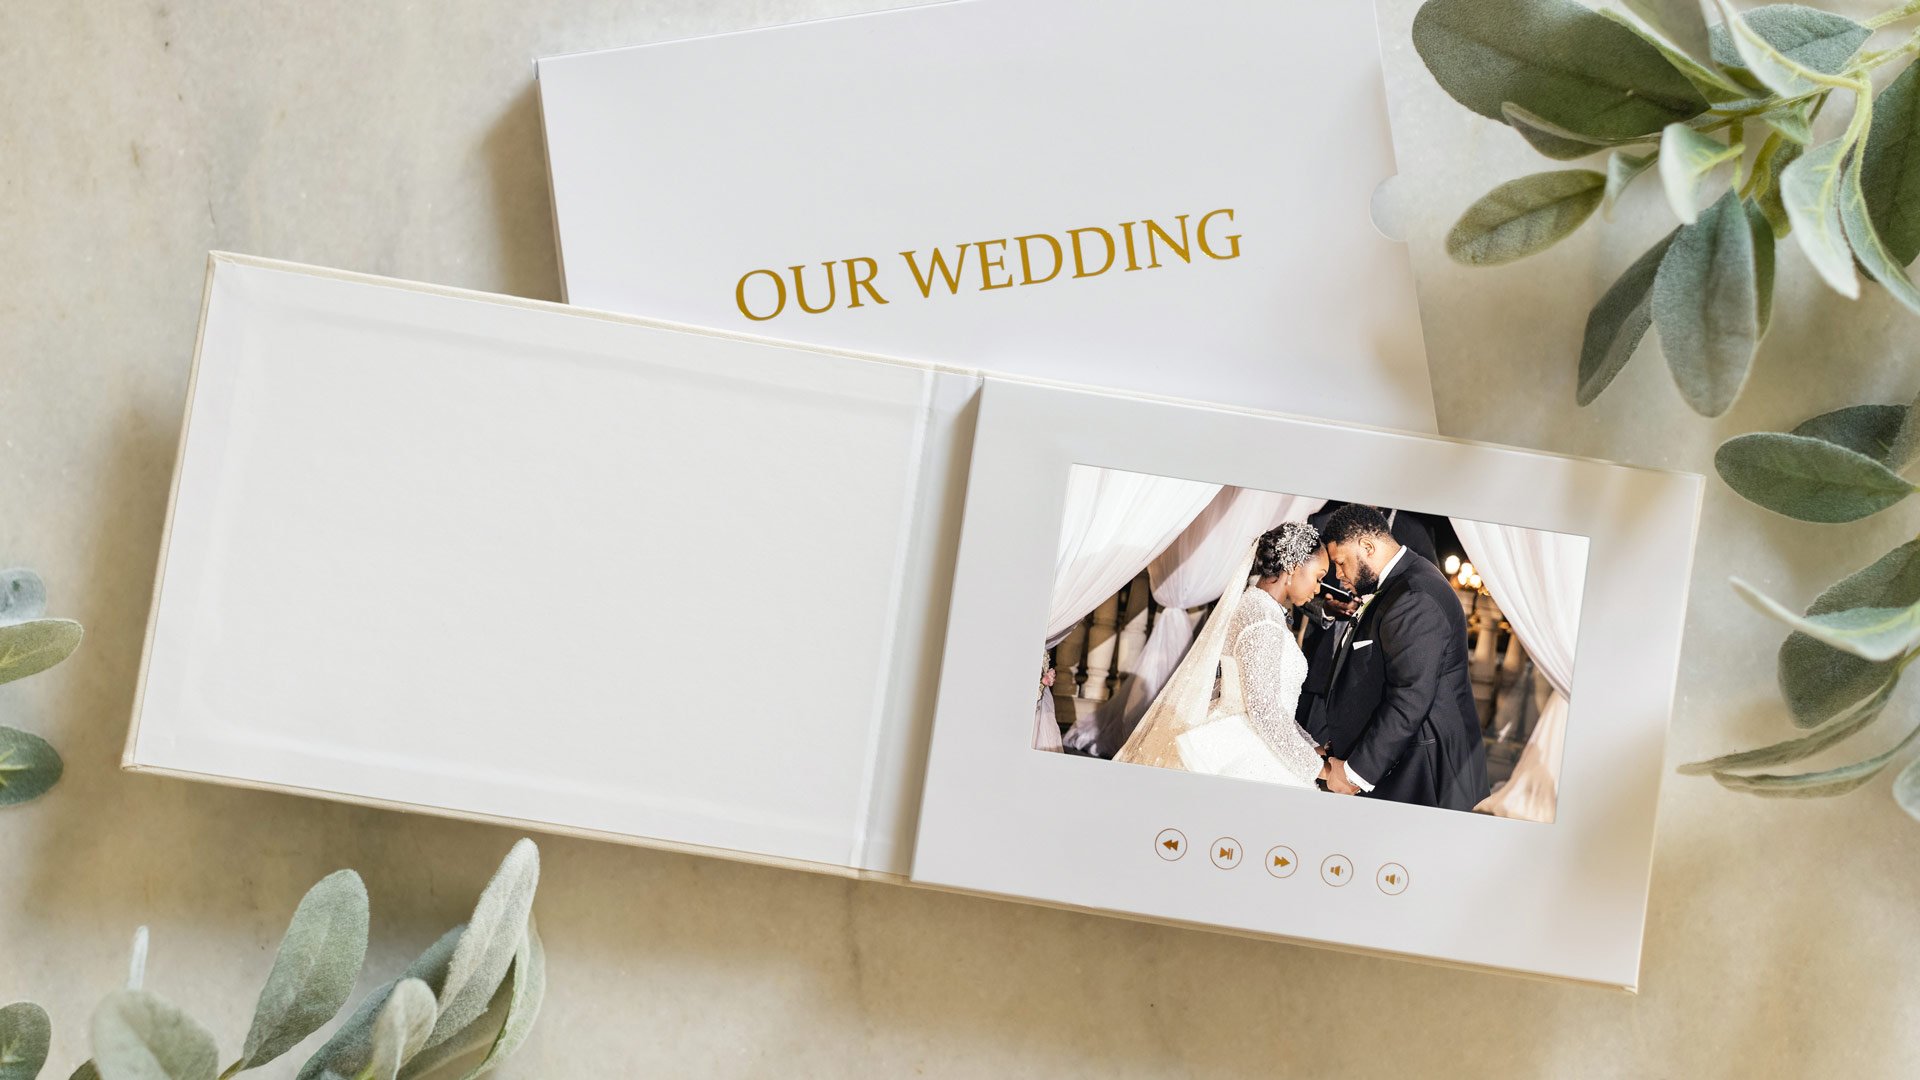 A Wedding Video album on a coffee table - The Motion Books